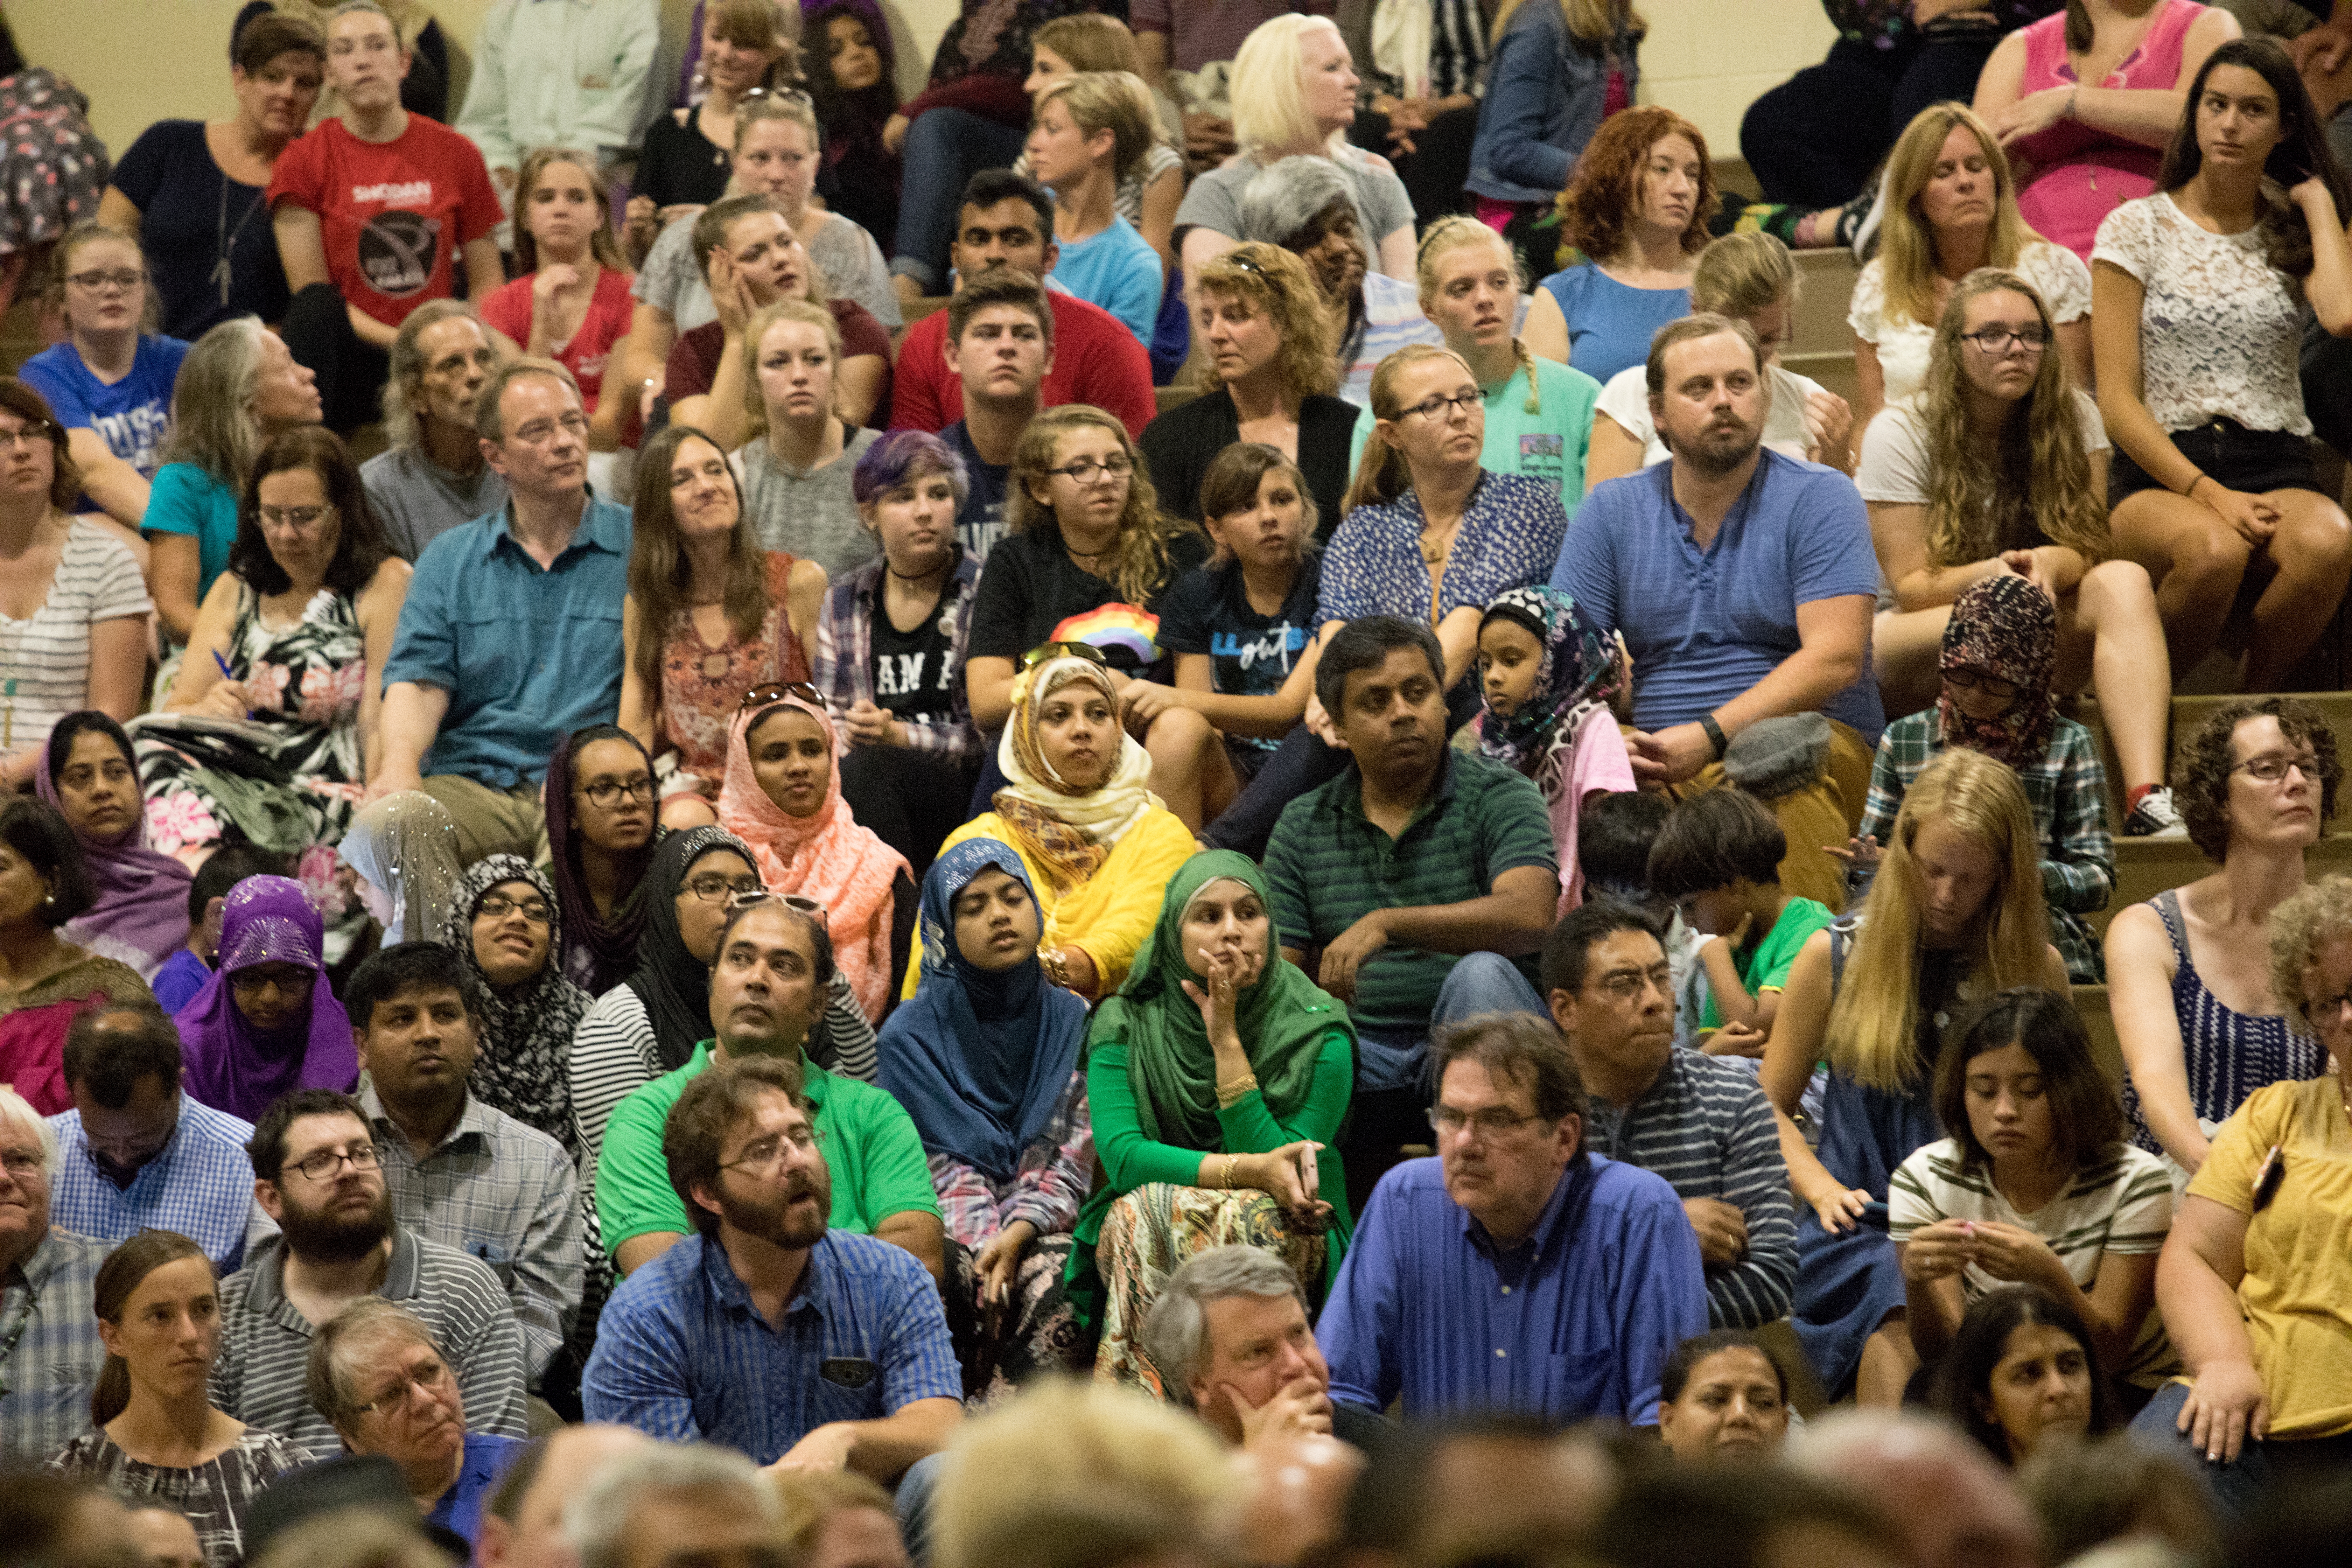 Students, faculty, and Greencastle residents listen as Malala speaks%2FNATALIE BRUNINI